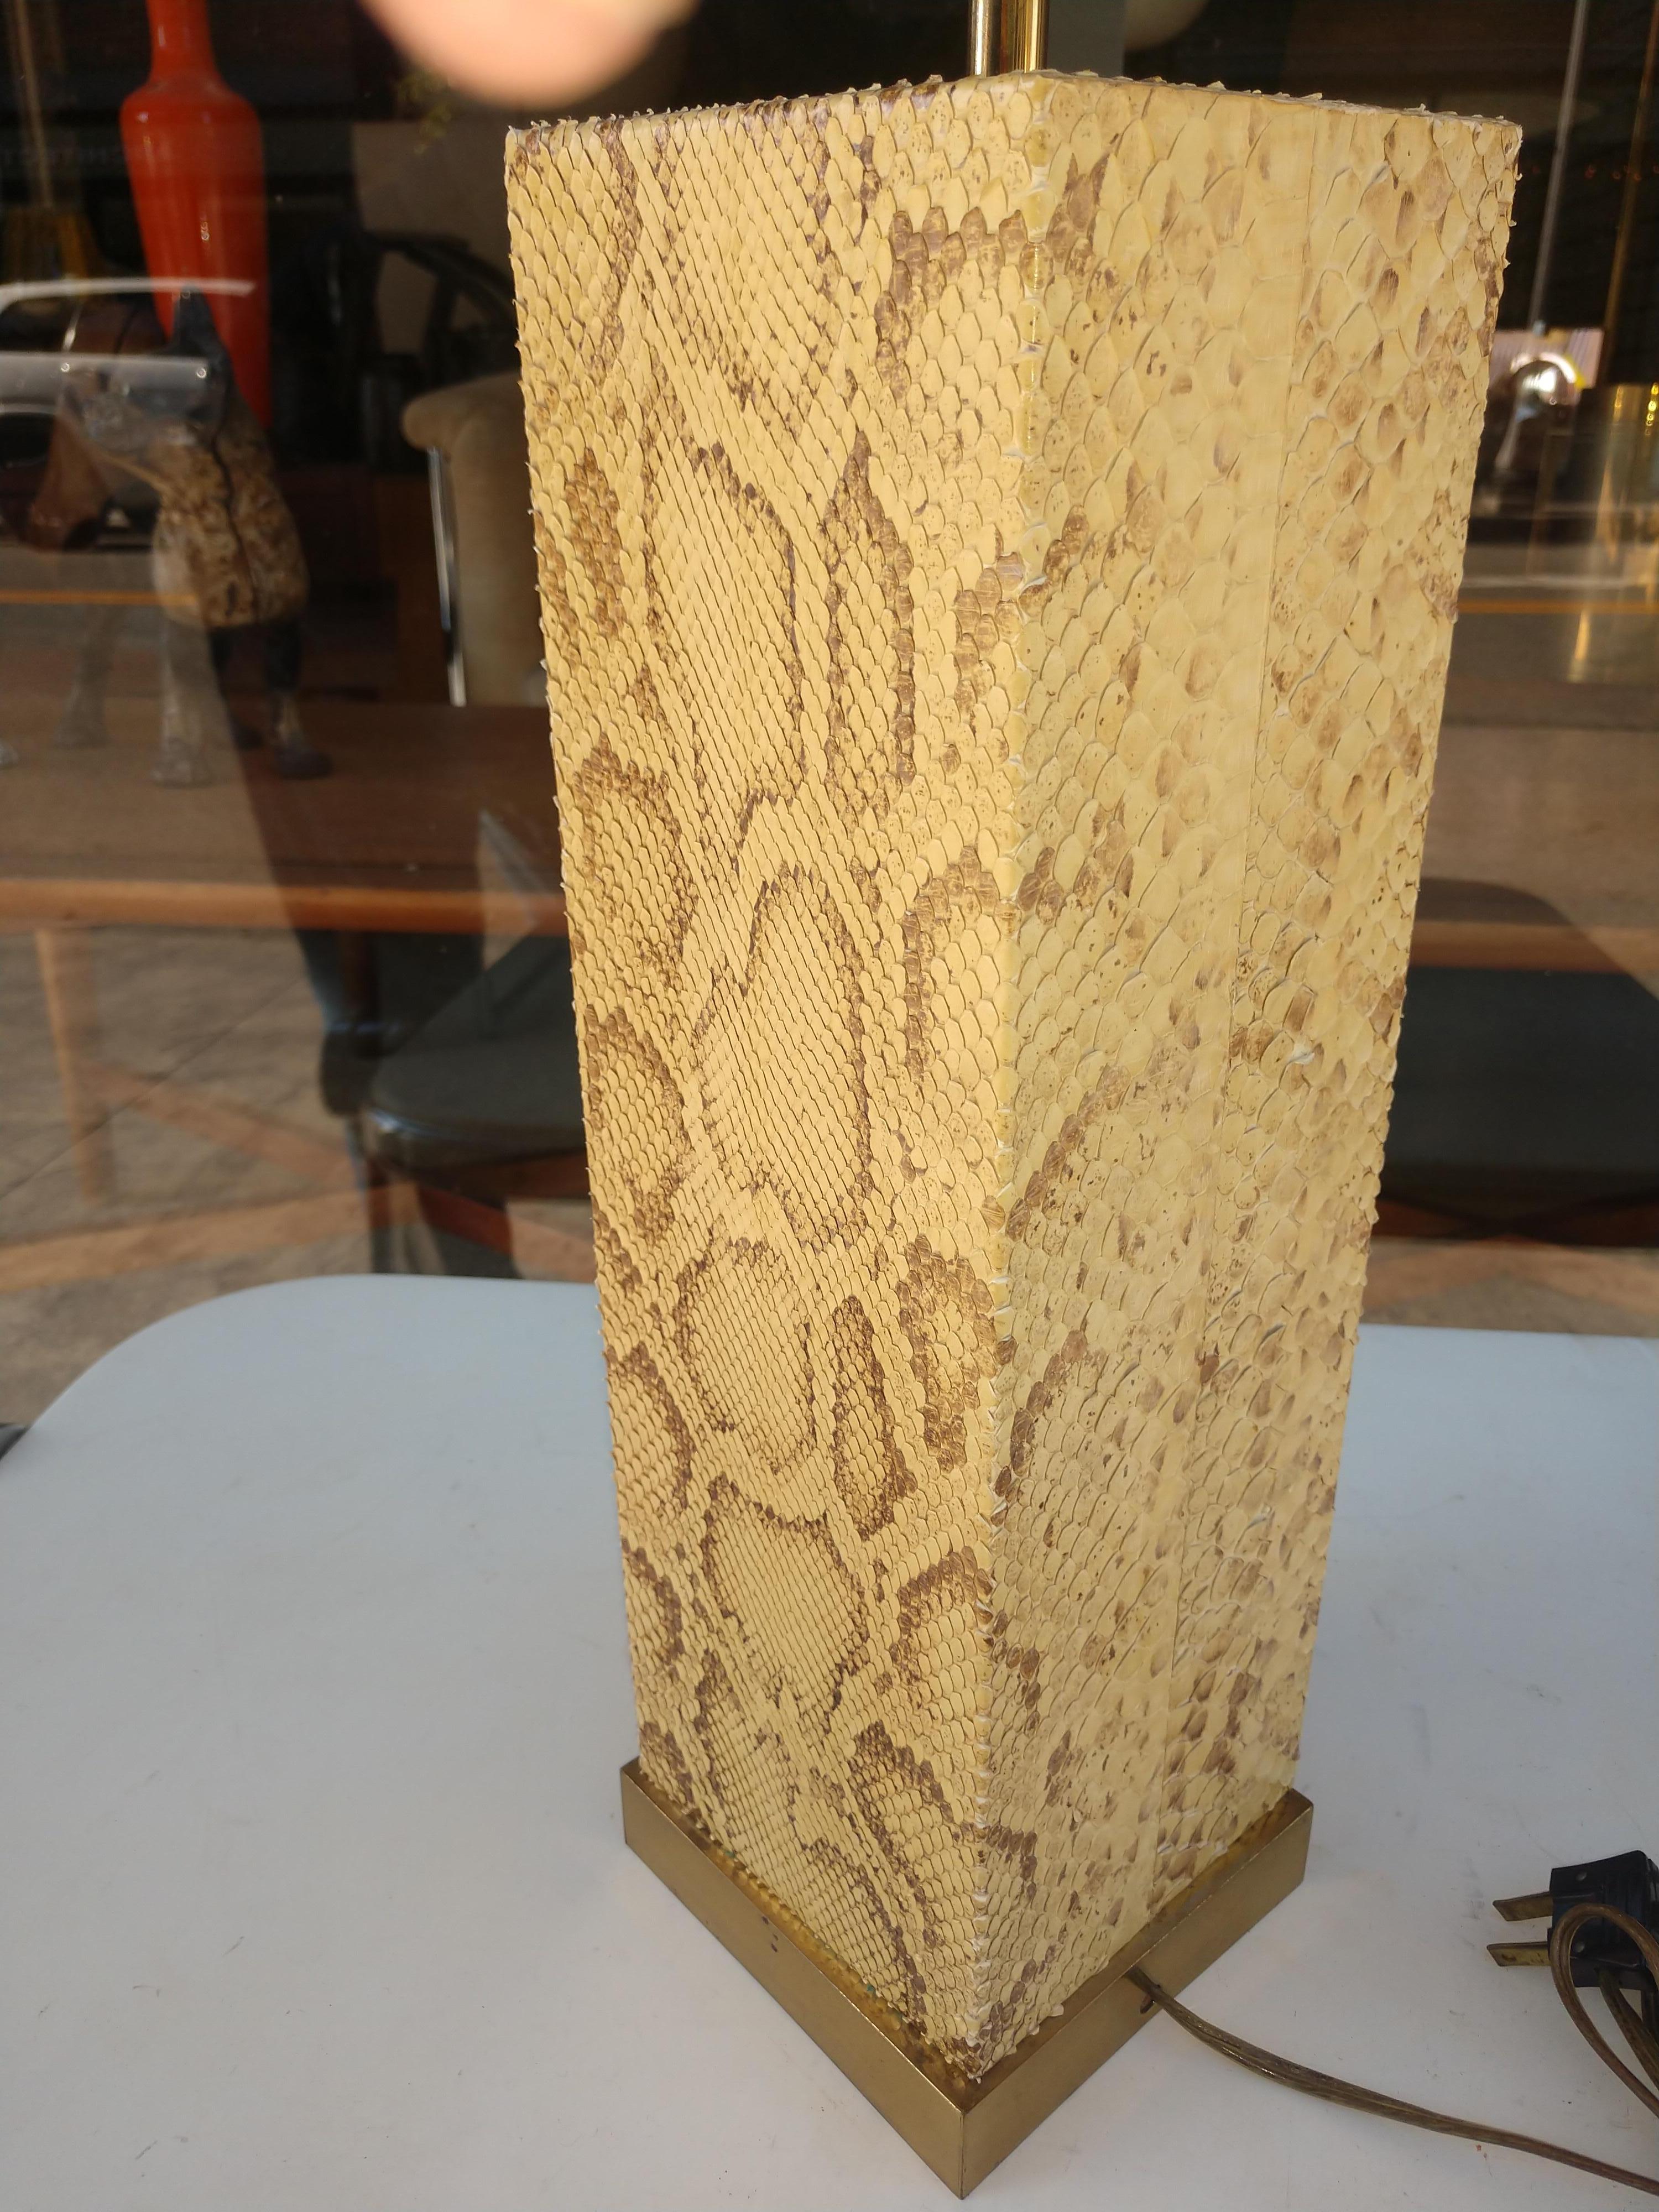 Mid Century Modern Python Skin Table Lamp by Karl Springer 1970 In Good Condition For Sale In Port Jervis, NY